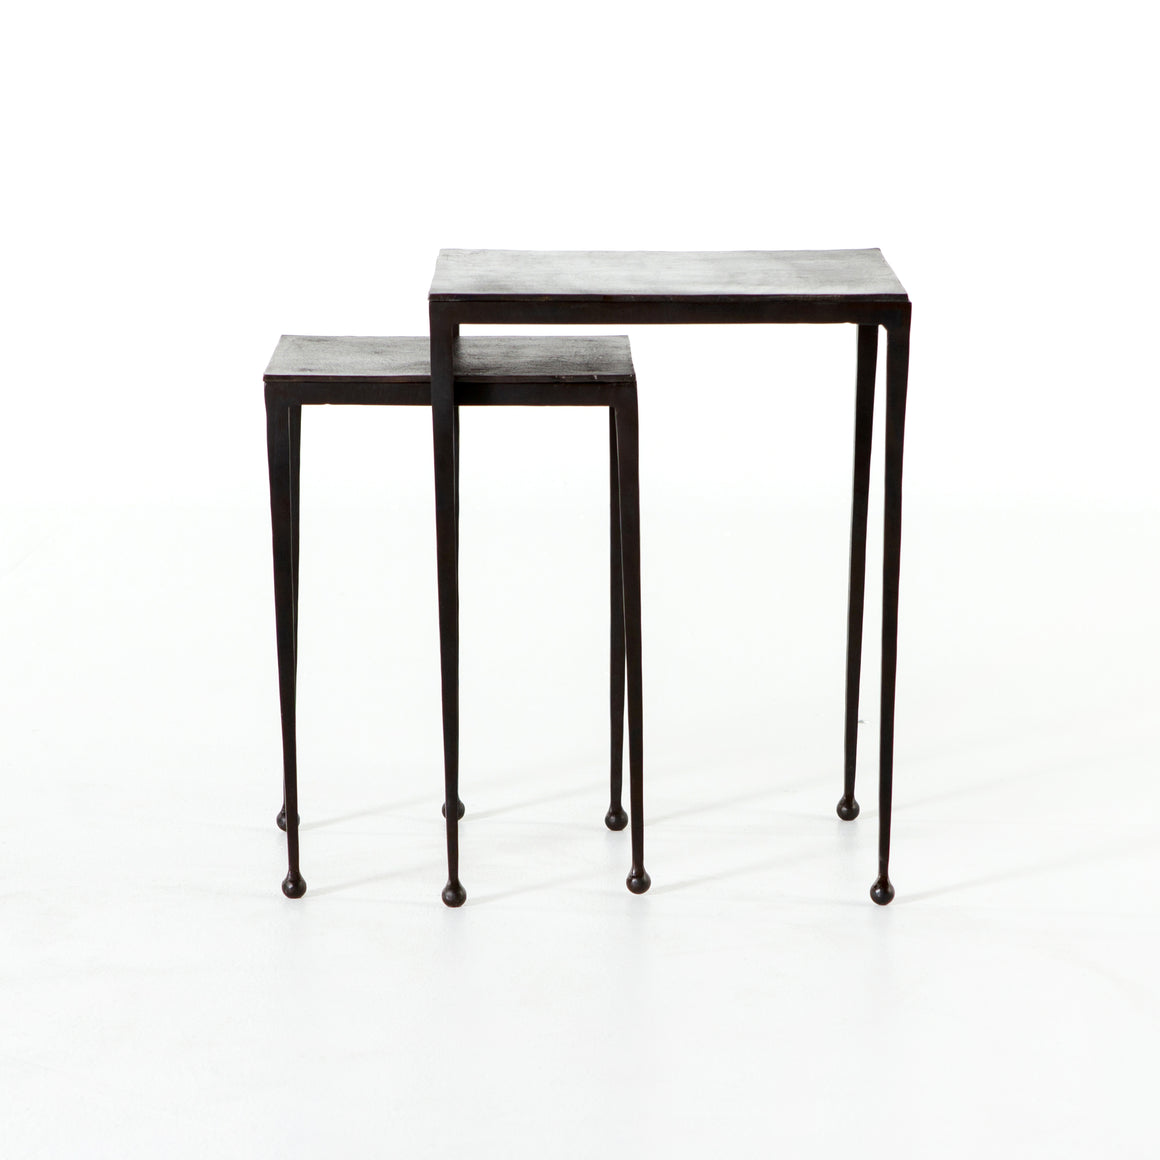 Dalston Nesting End Tables - Antique Rust